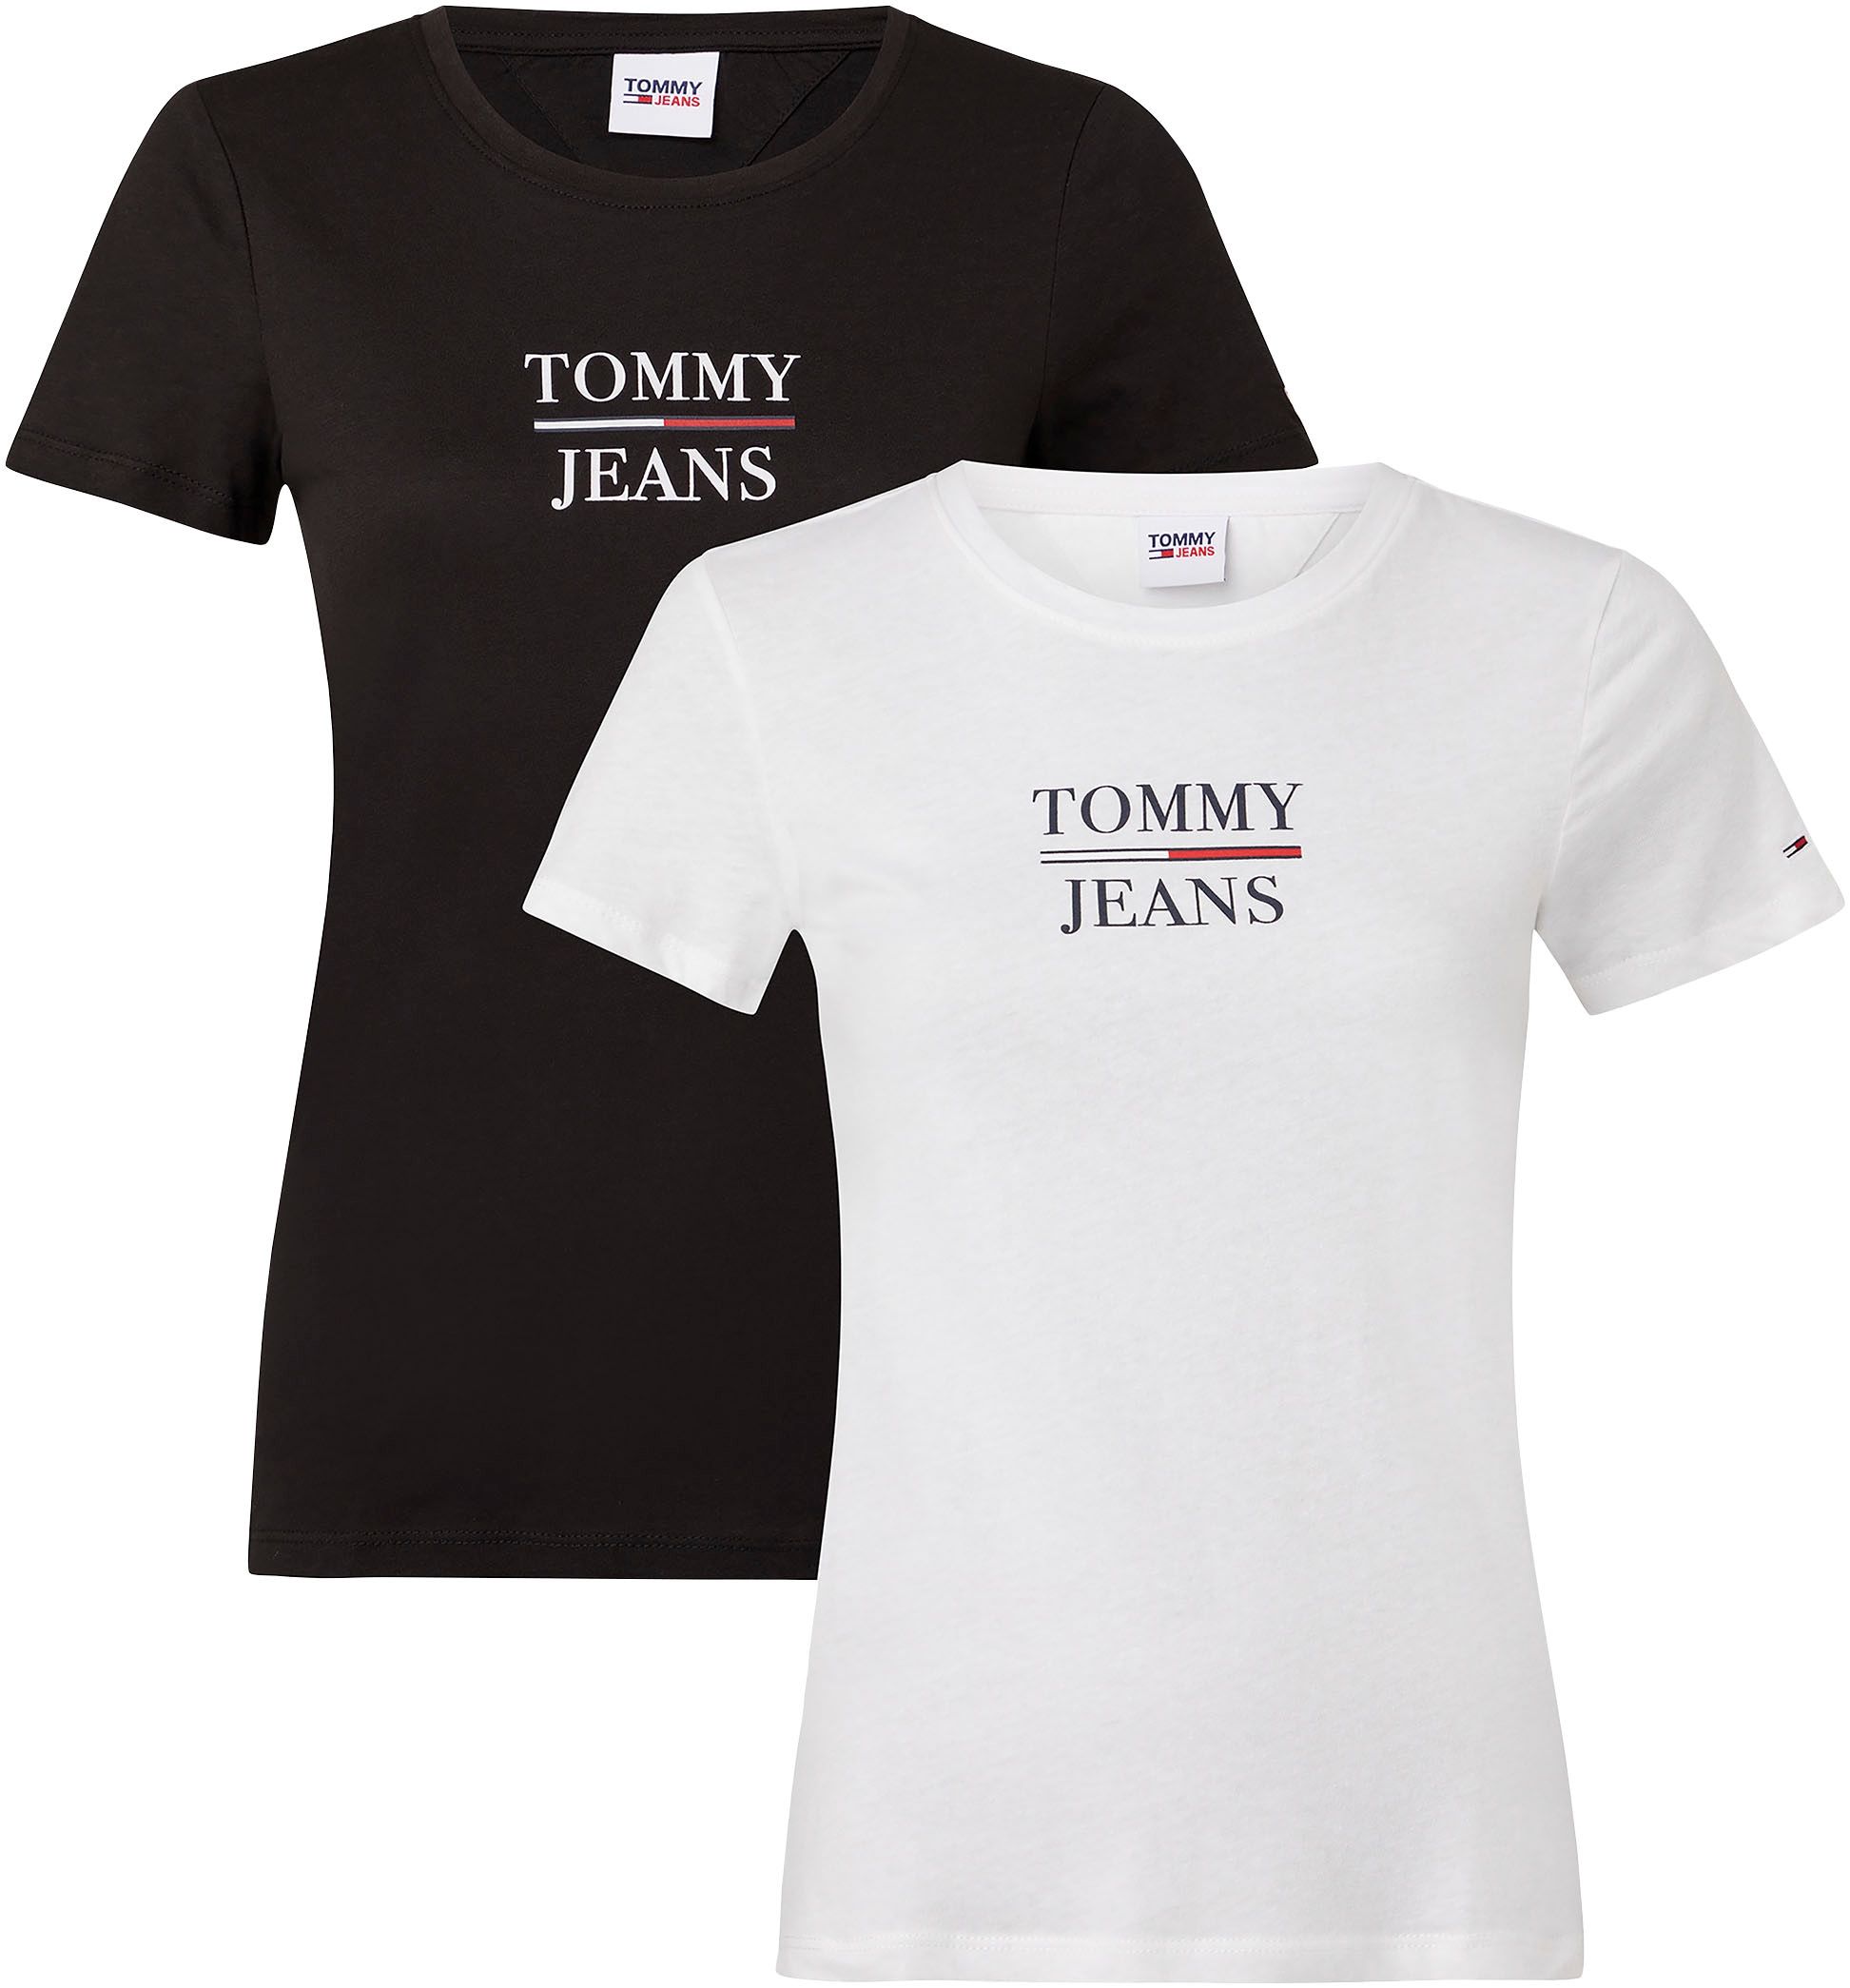 2PACK Skinny T-Shirt TOMMY | SS«, online ESS 2er-Pack) T Tommy (Packung, walking »TJW I\'m kaufen Jeans